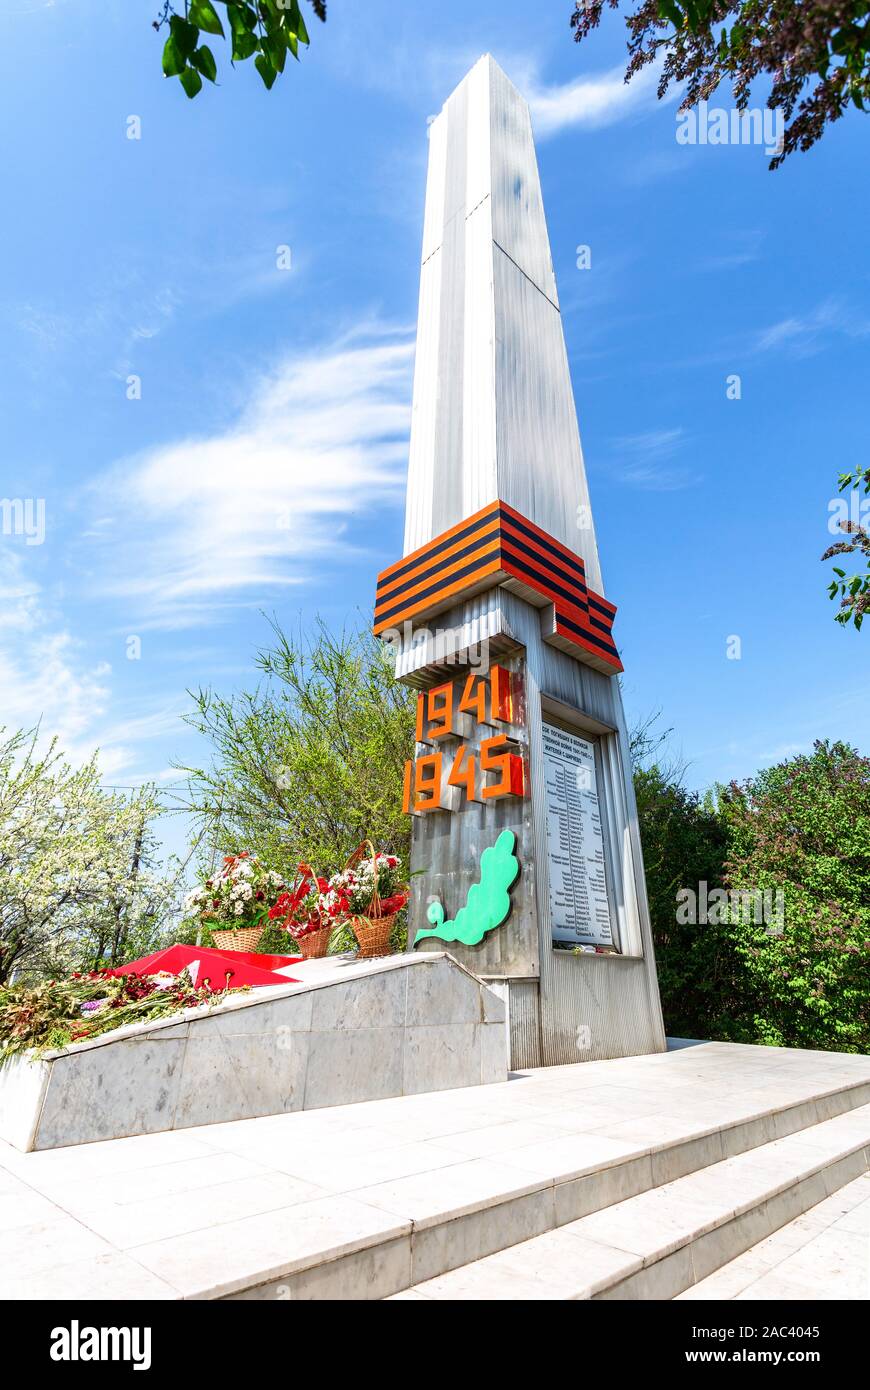 Shiryaevo, Samara, Russia - May 11, 2019: Monument to the fallen soldiers of the Red Army during Great Patriotic War 1941-1945 Stock Photo